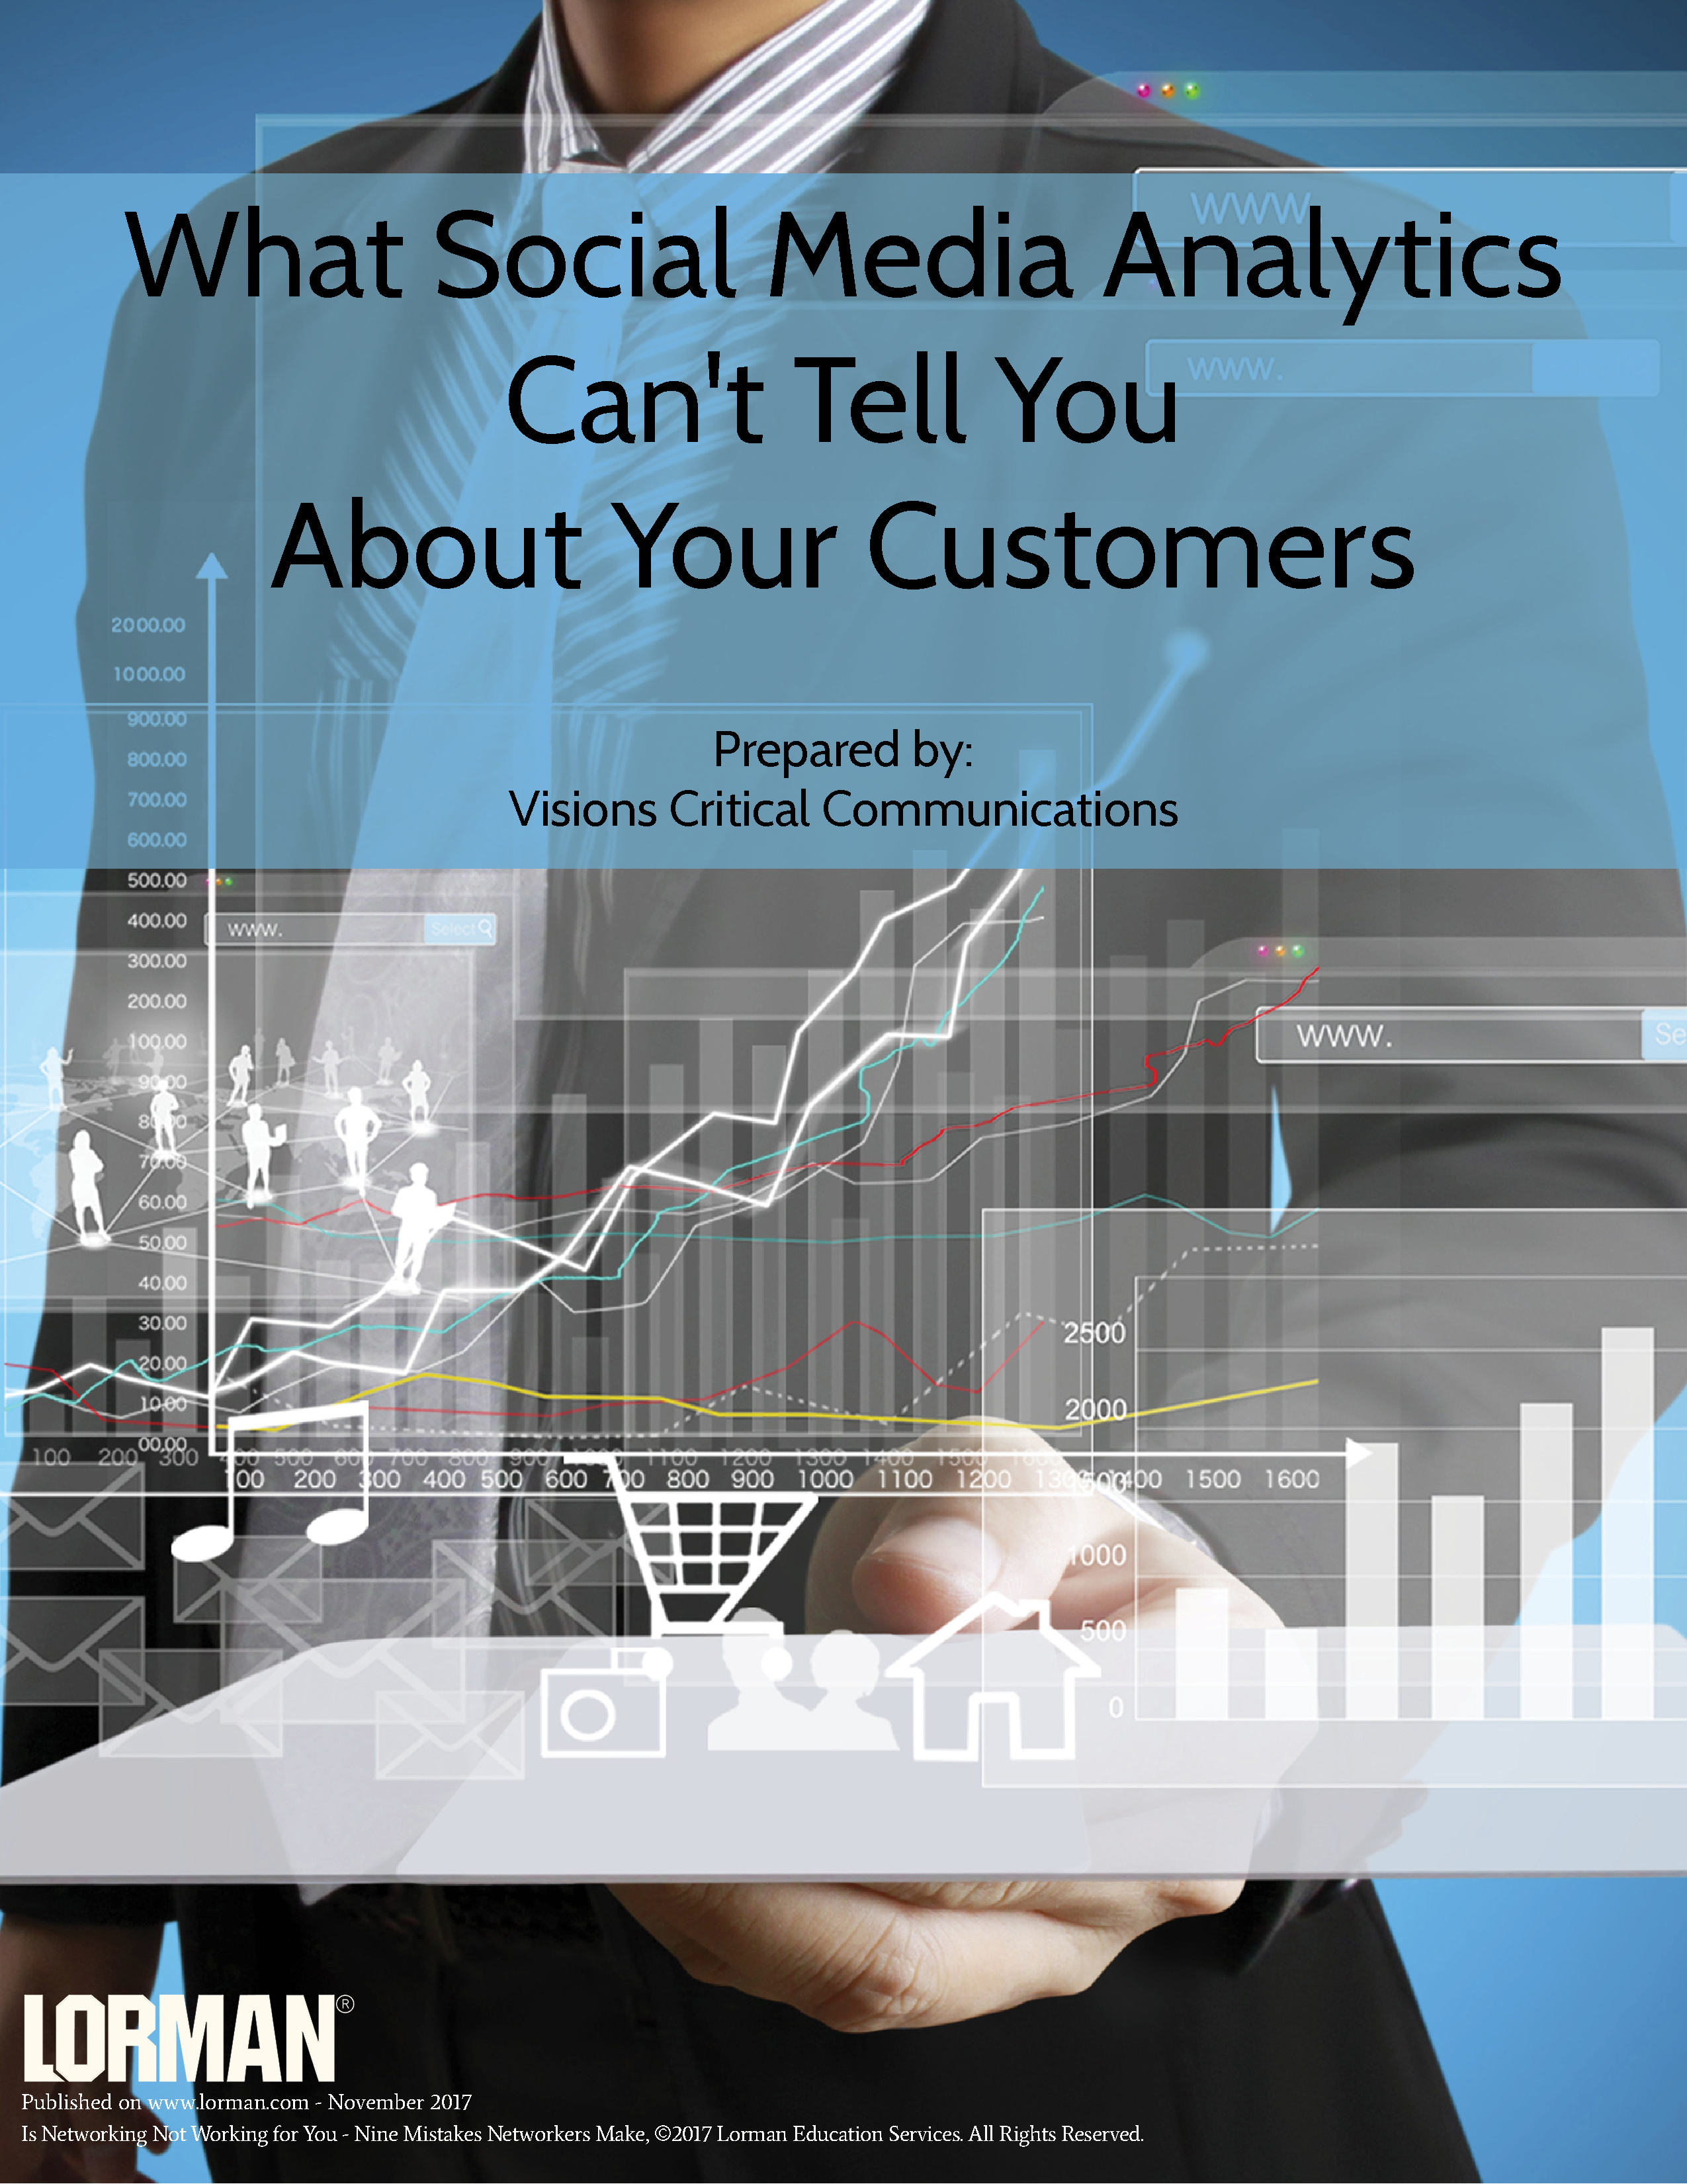 What Social Media Analytics Can't Tell You About Your Customers